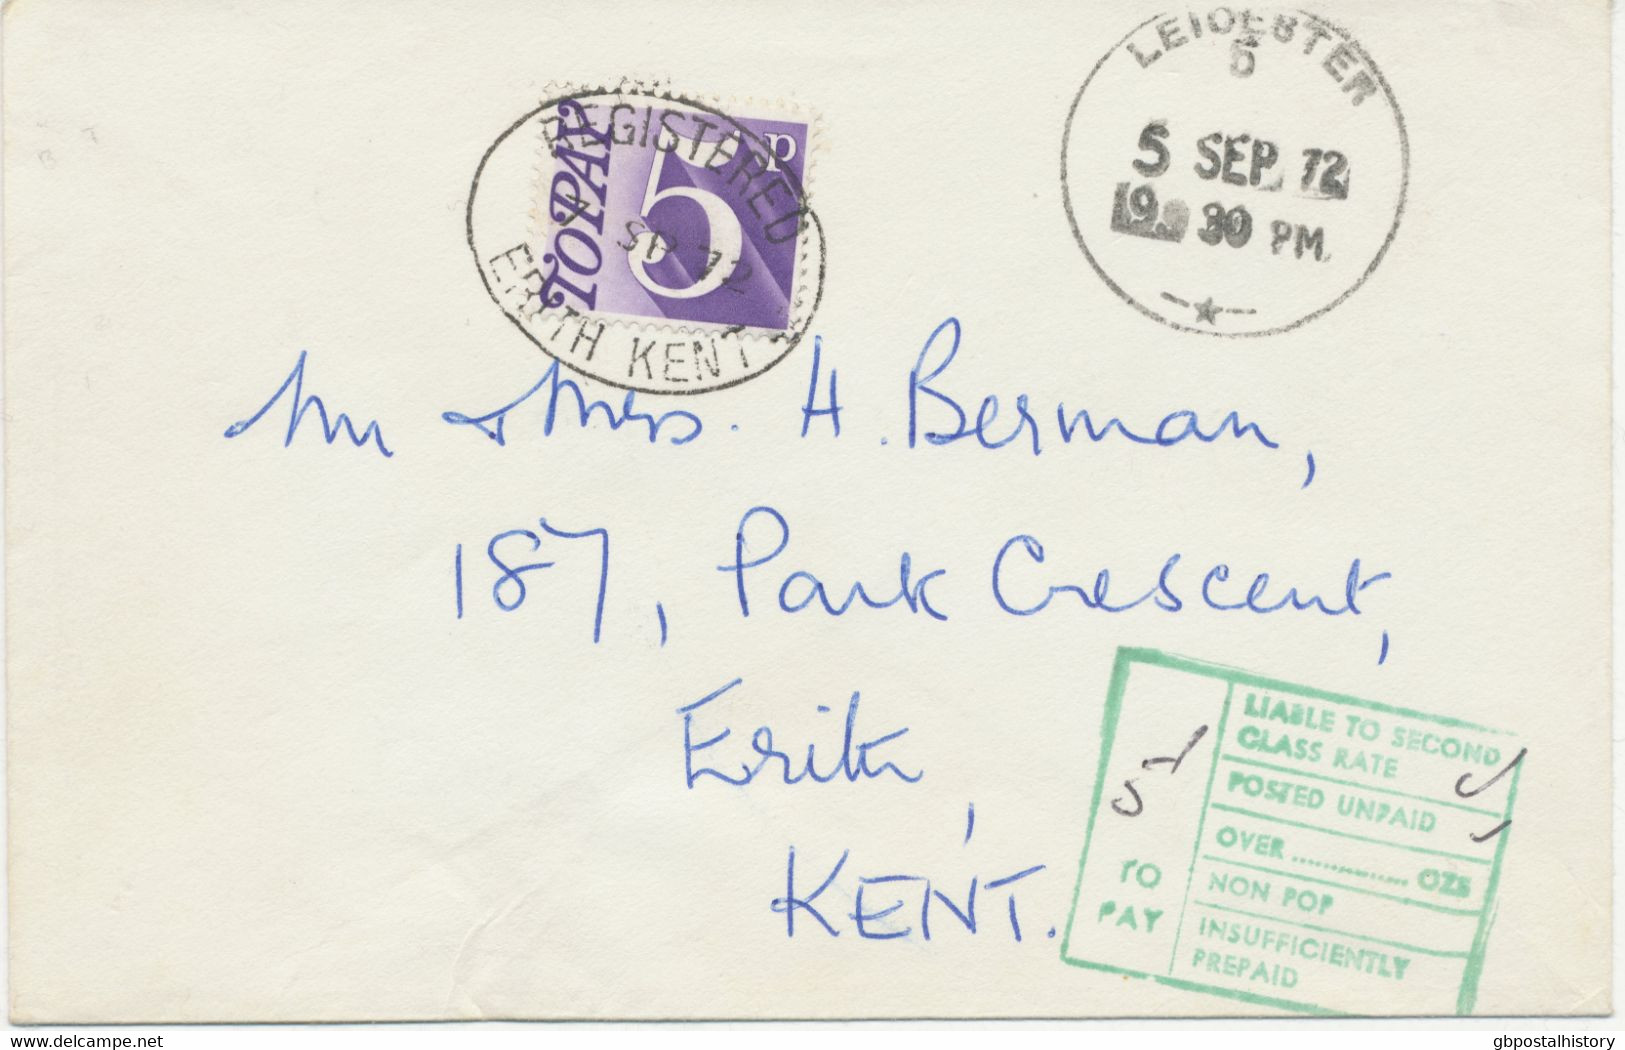 GB 1972 Superb Unpaid Cover Tied By Blackwell Datestamp „LEICESTER / 5“ Also Green Boxed + Instructional / Postage Due - Impuestos